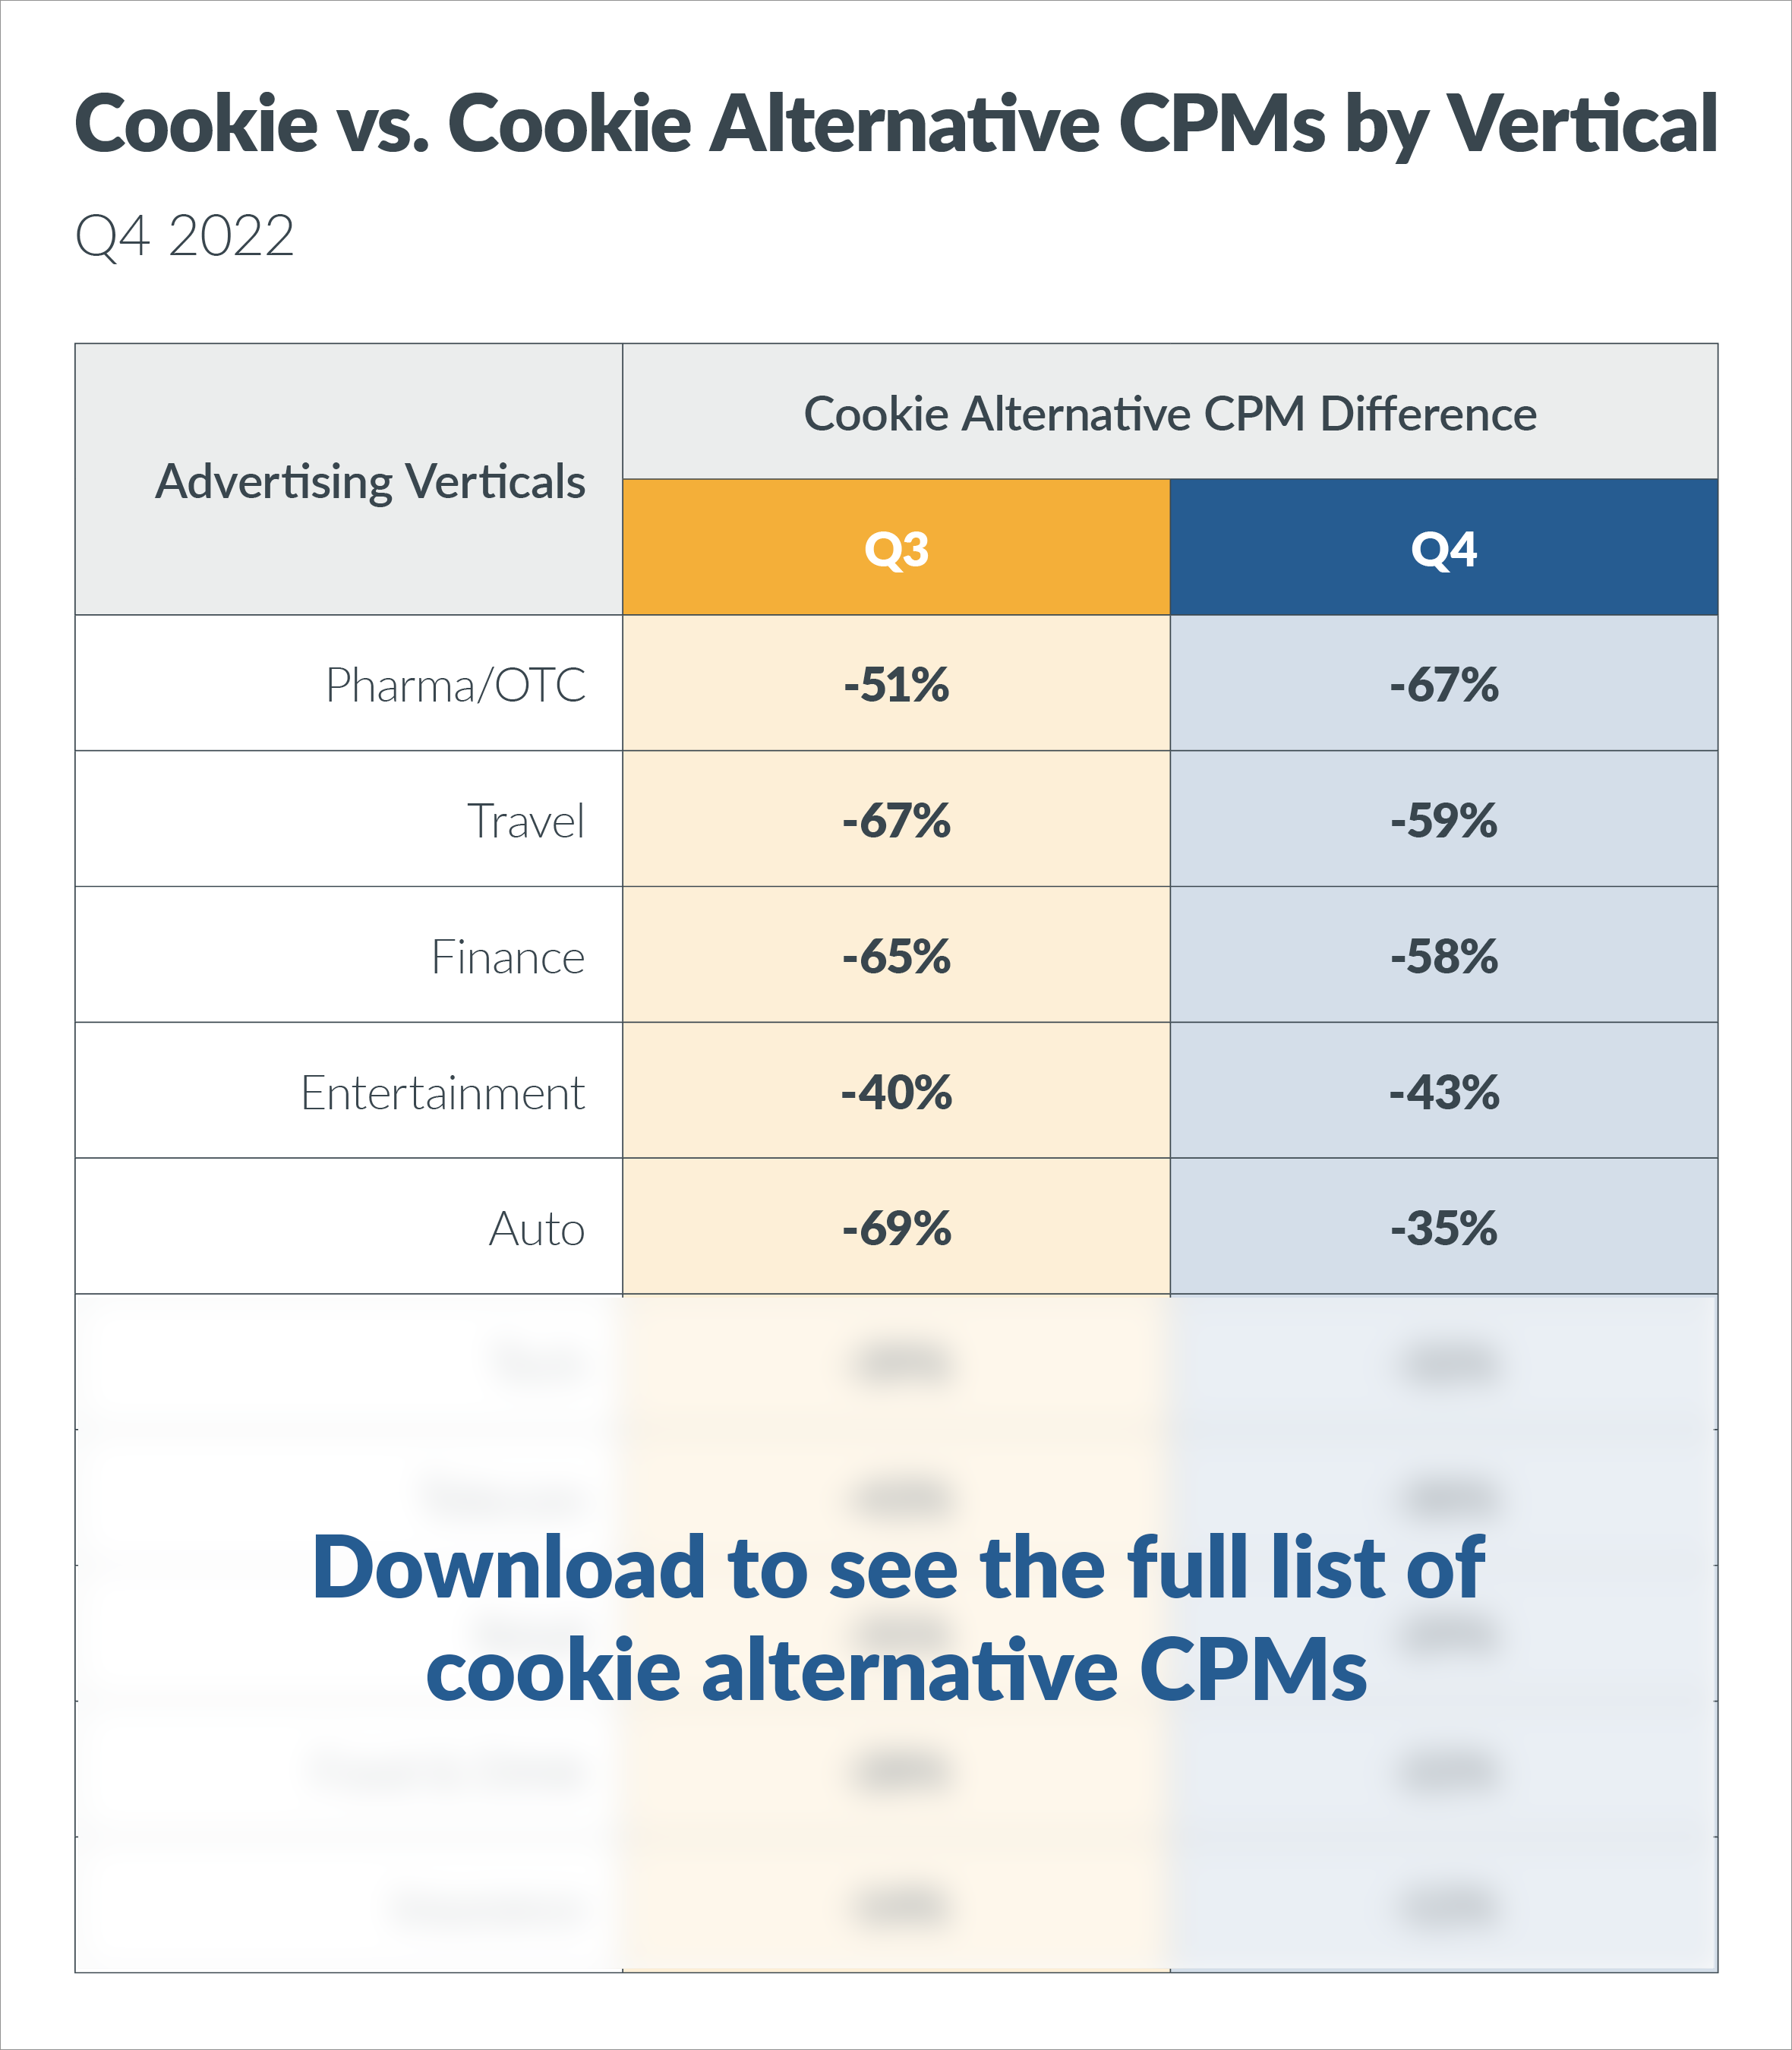 Download to see full list of cookie alternative CPMs